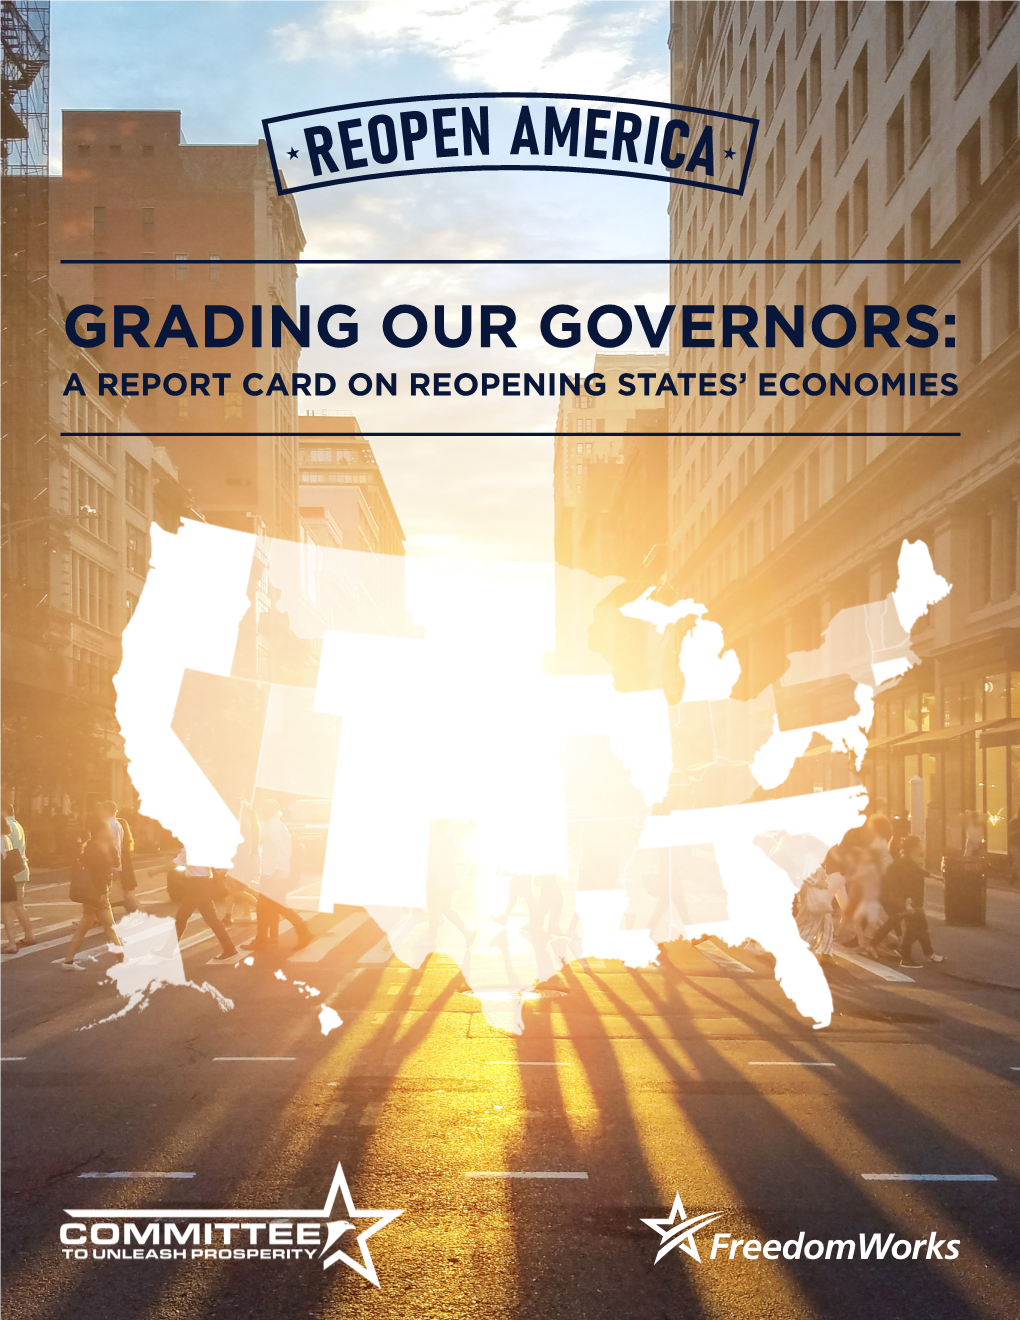 Grading Our Governors: a Report Card on Reopening States’ Economies